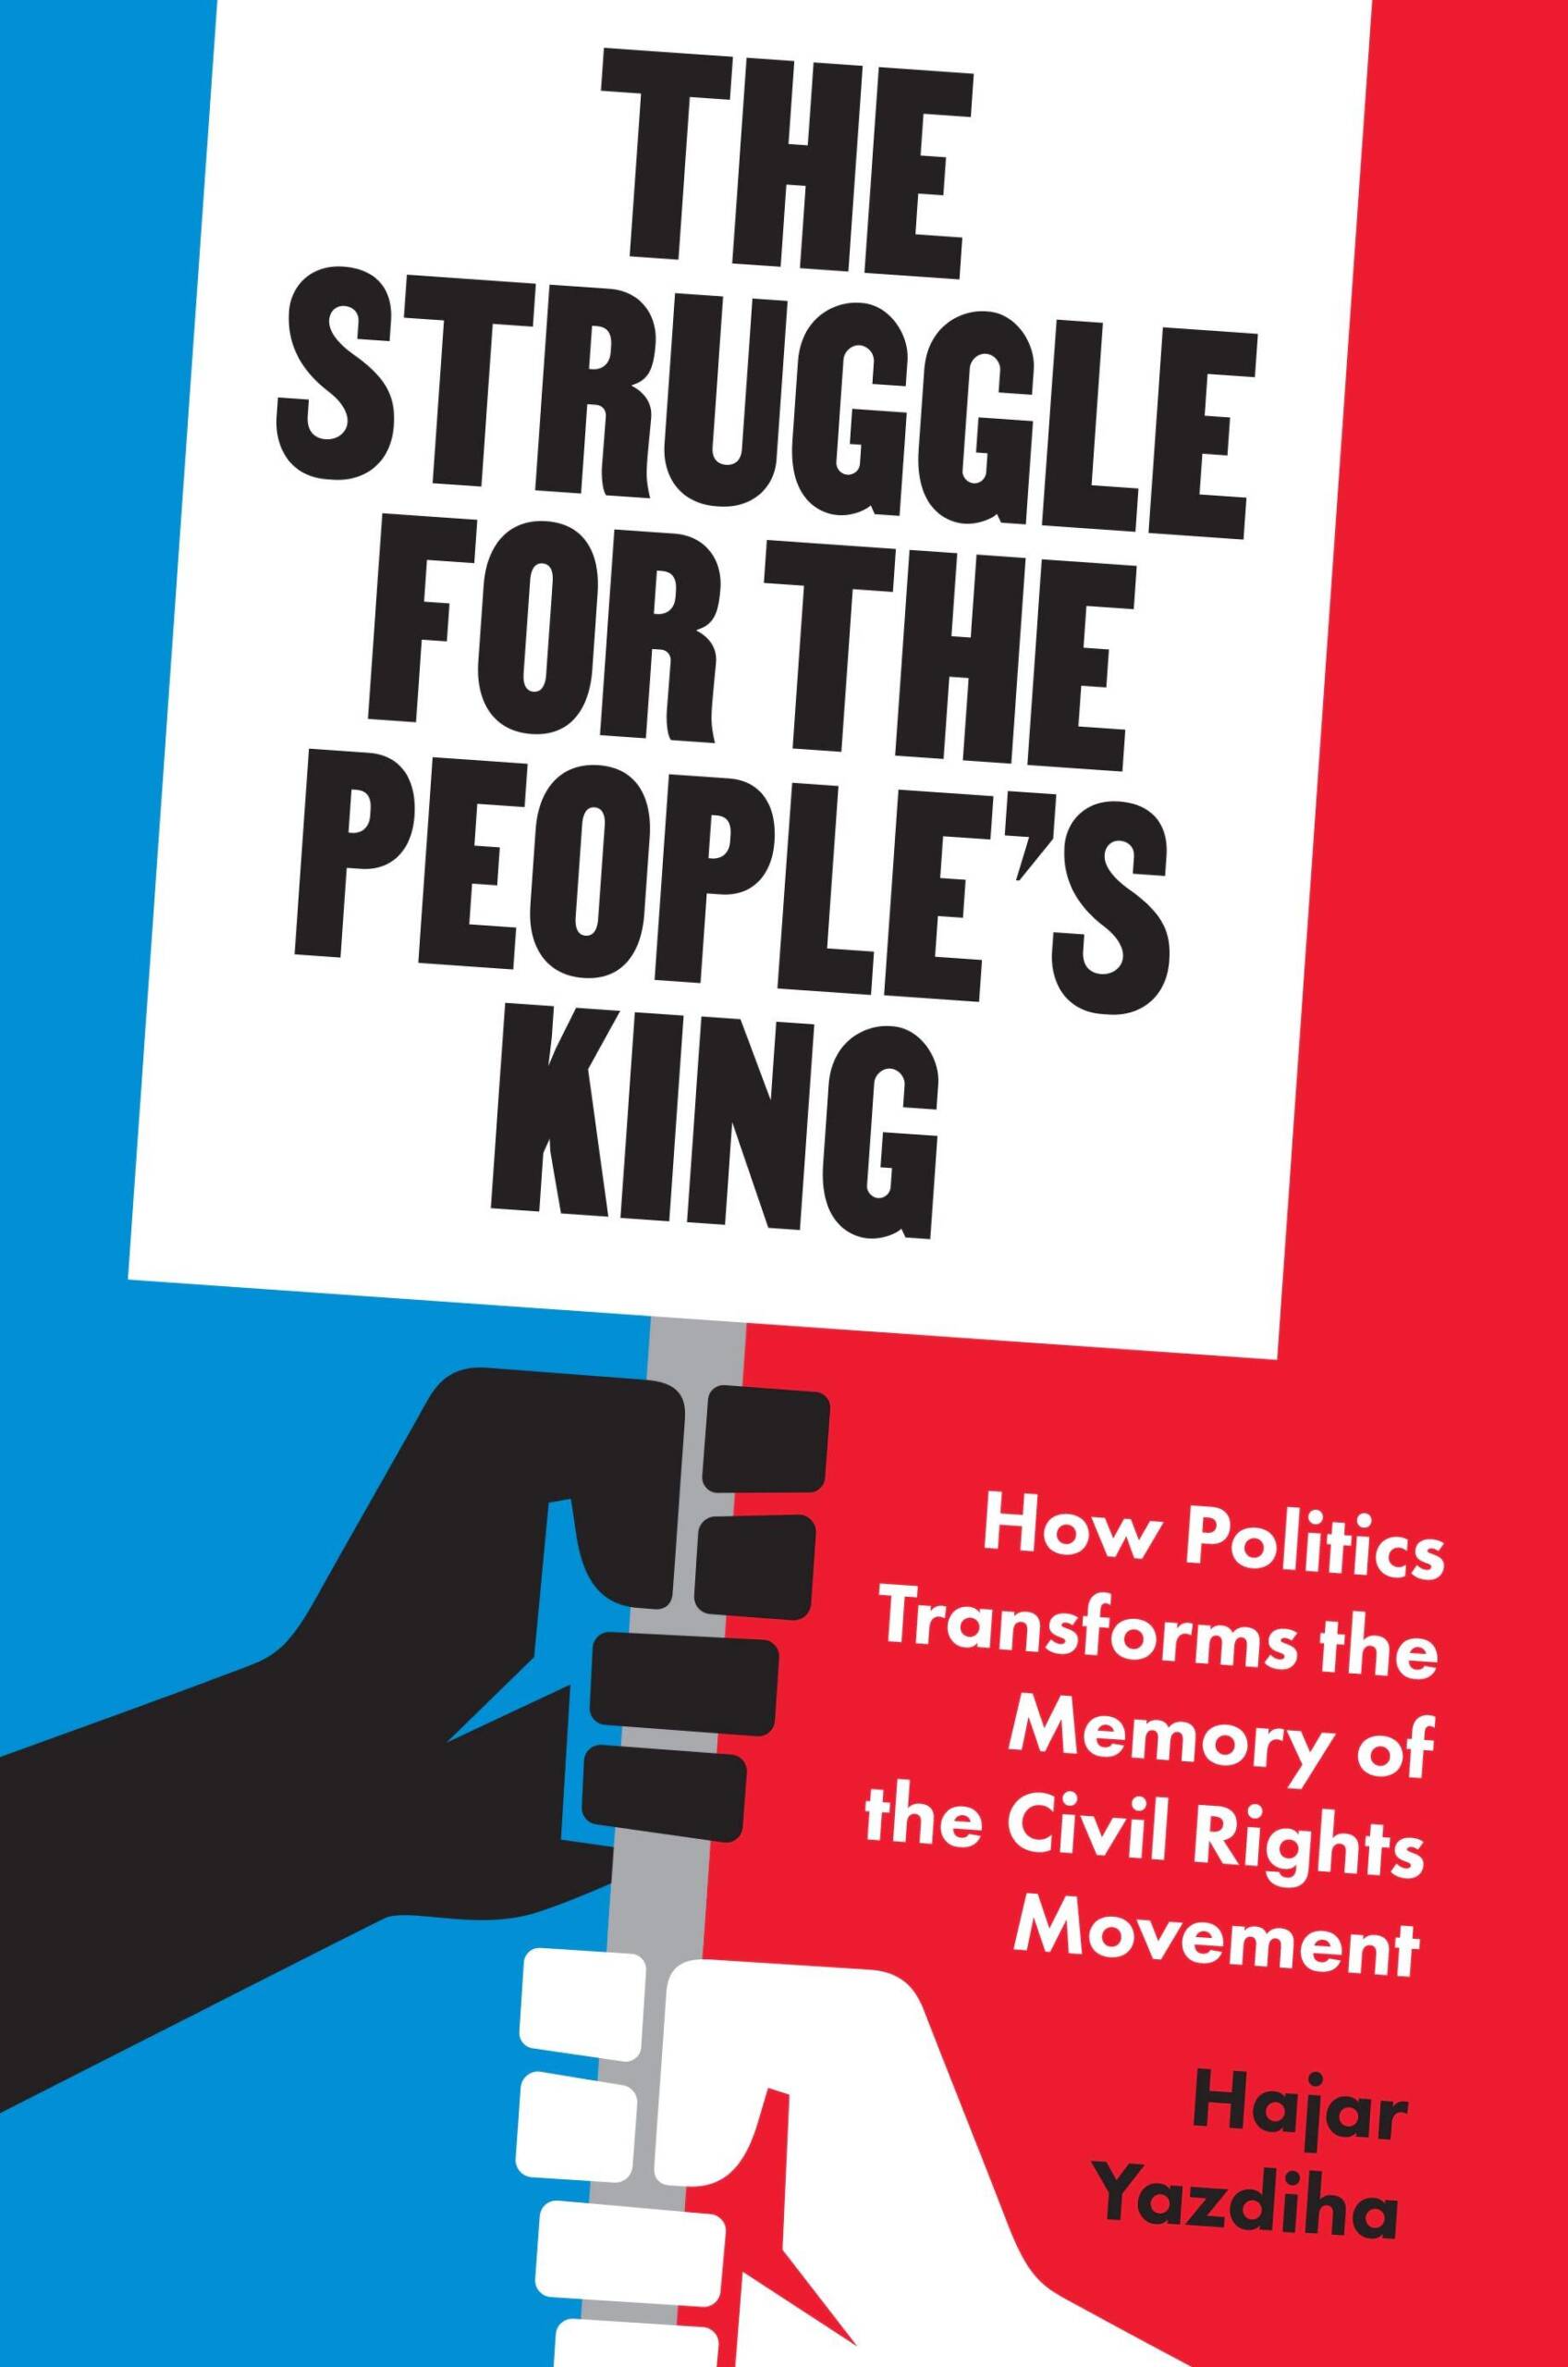 The Struggle for the Peoples King by Hajar Yazdiha book cover